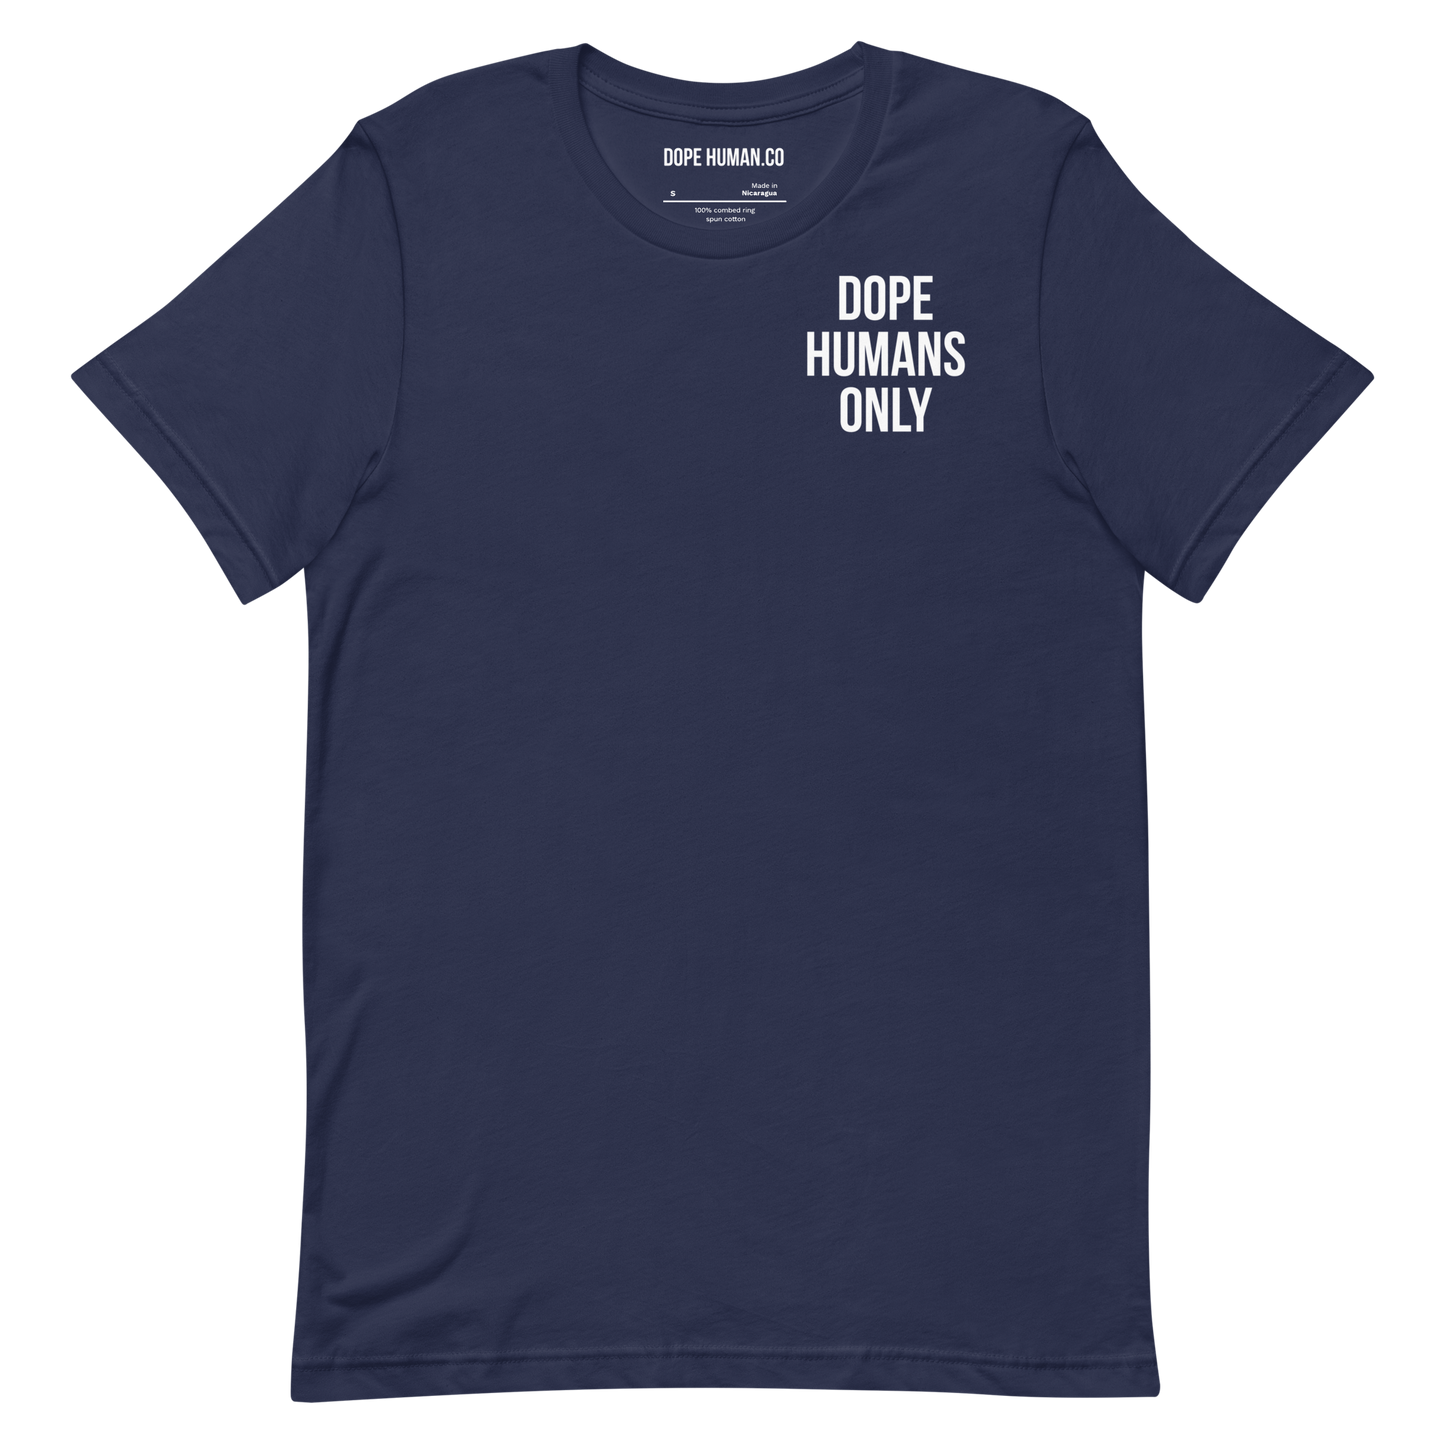 DOPE HUMANS ONLY T-SHIRT